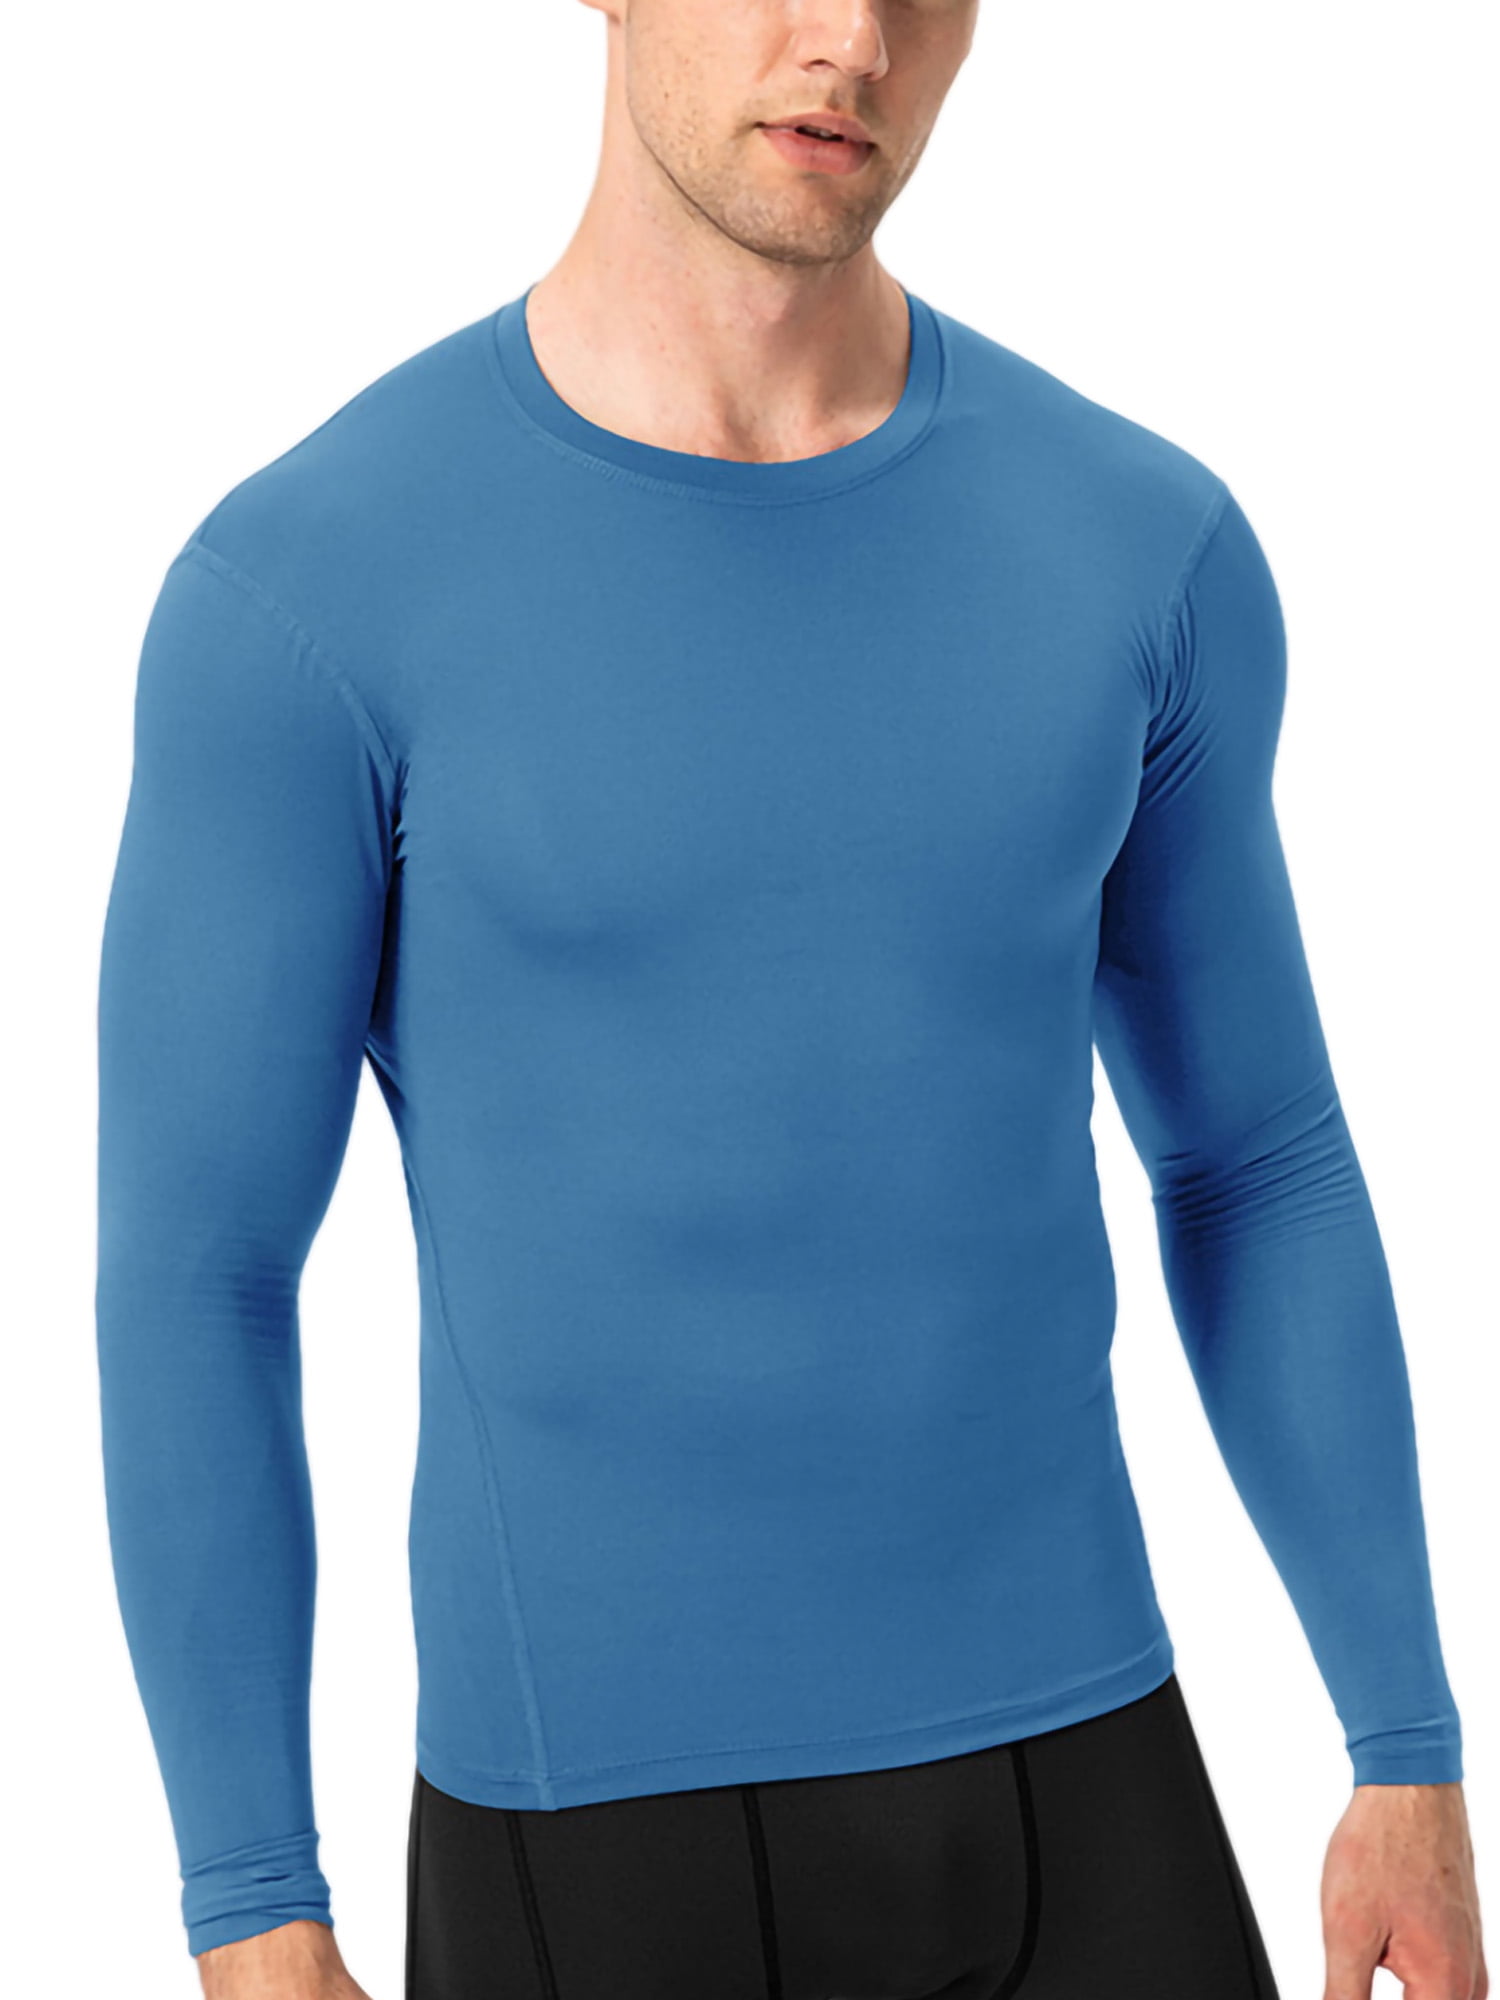 Frontwalk Mens Sport T Shirt Cool Dry Muscle Tops Long Sleeve Compression Shirts Running Breathable Baselayer T-shirt Gray Blue 3XL -